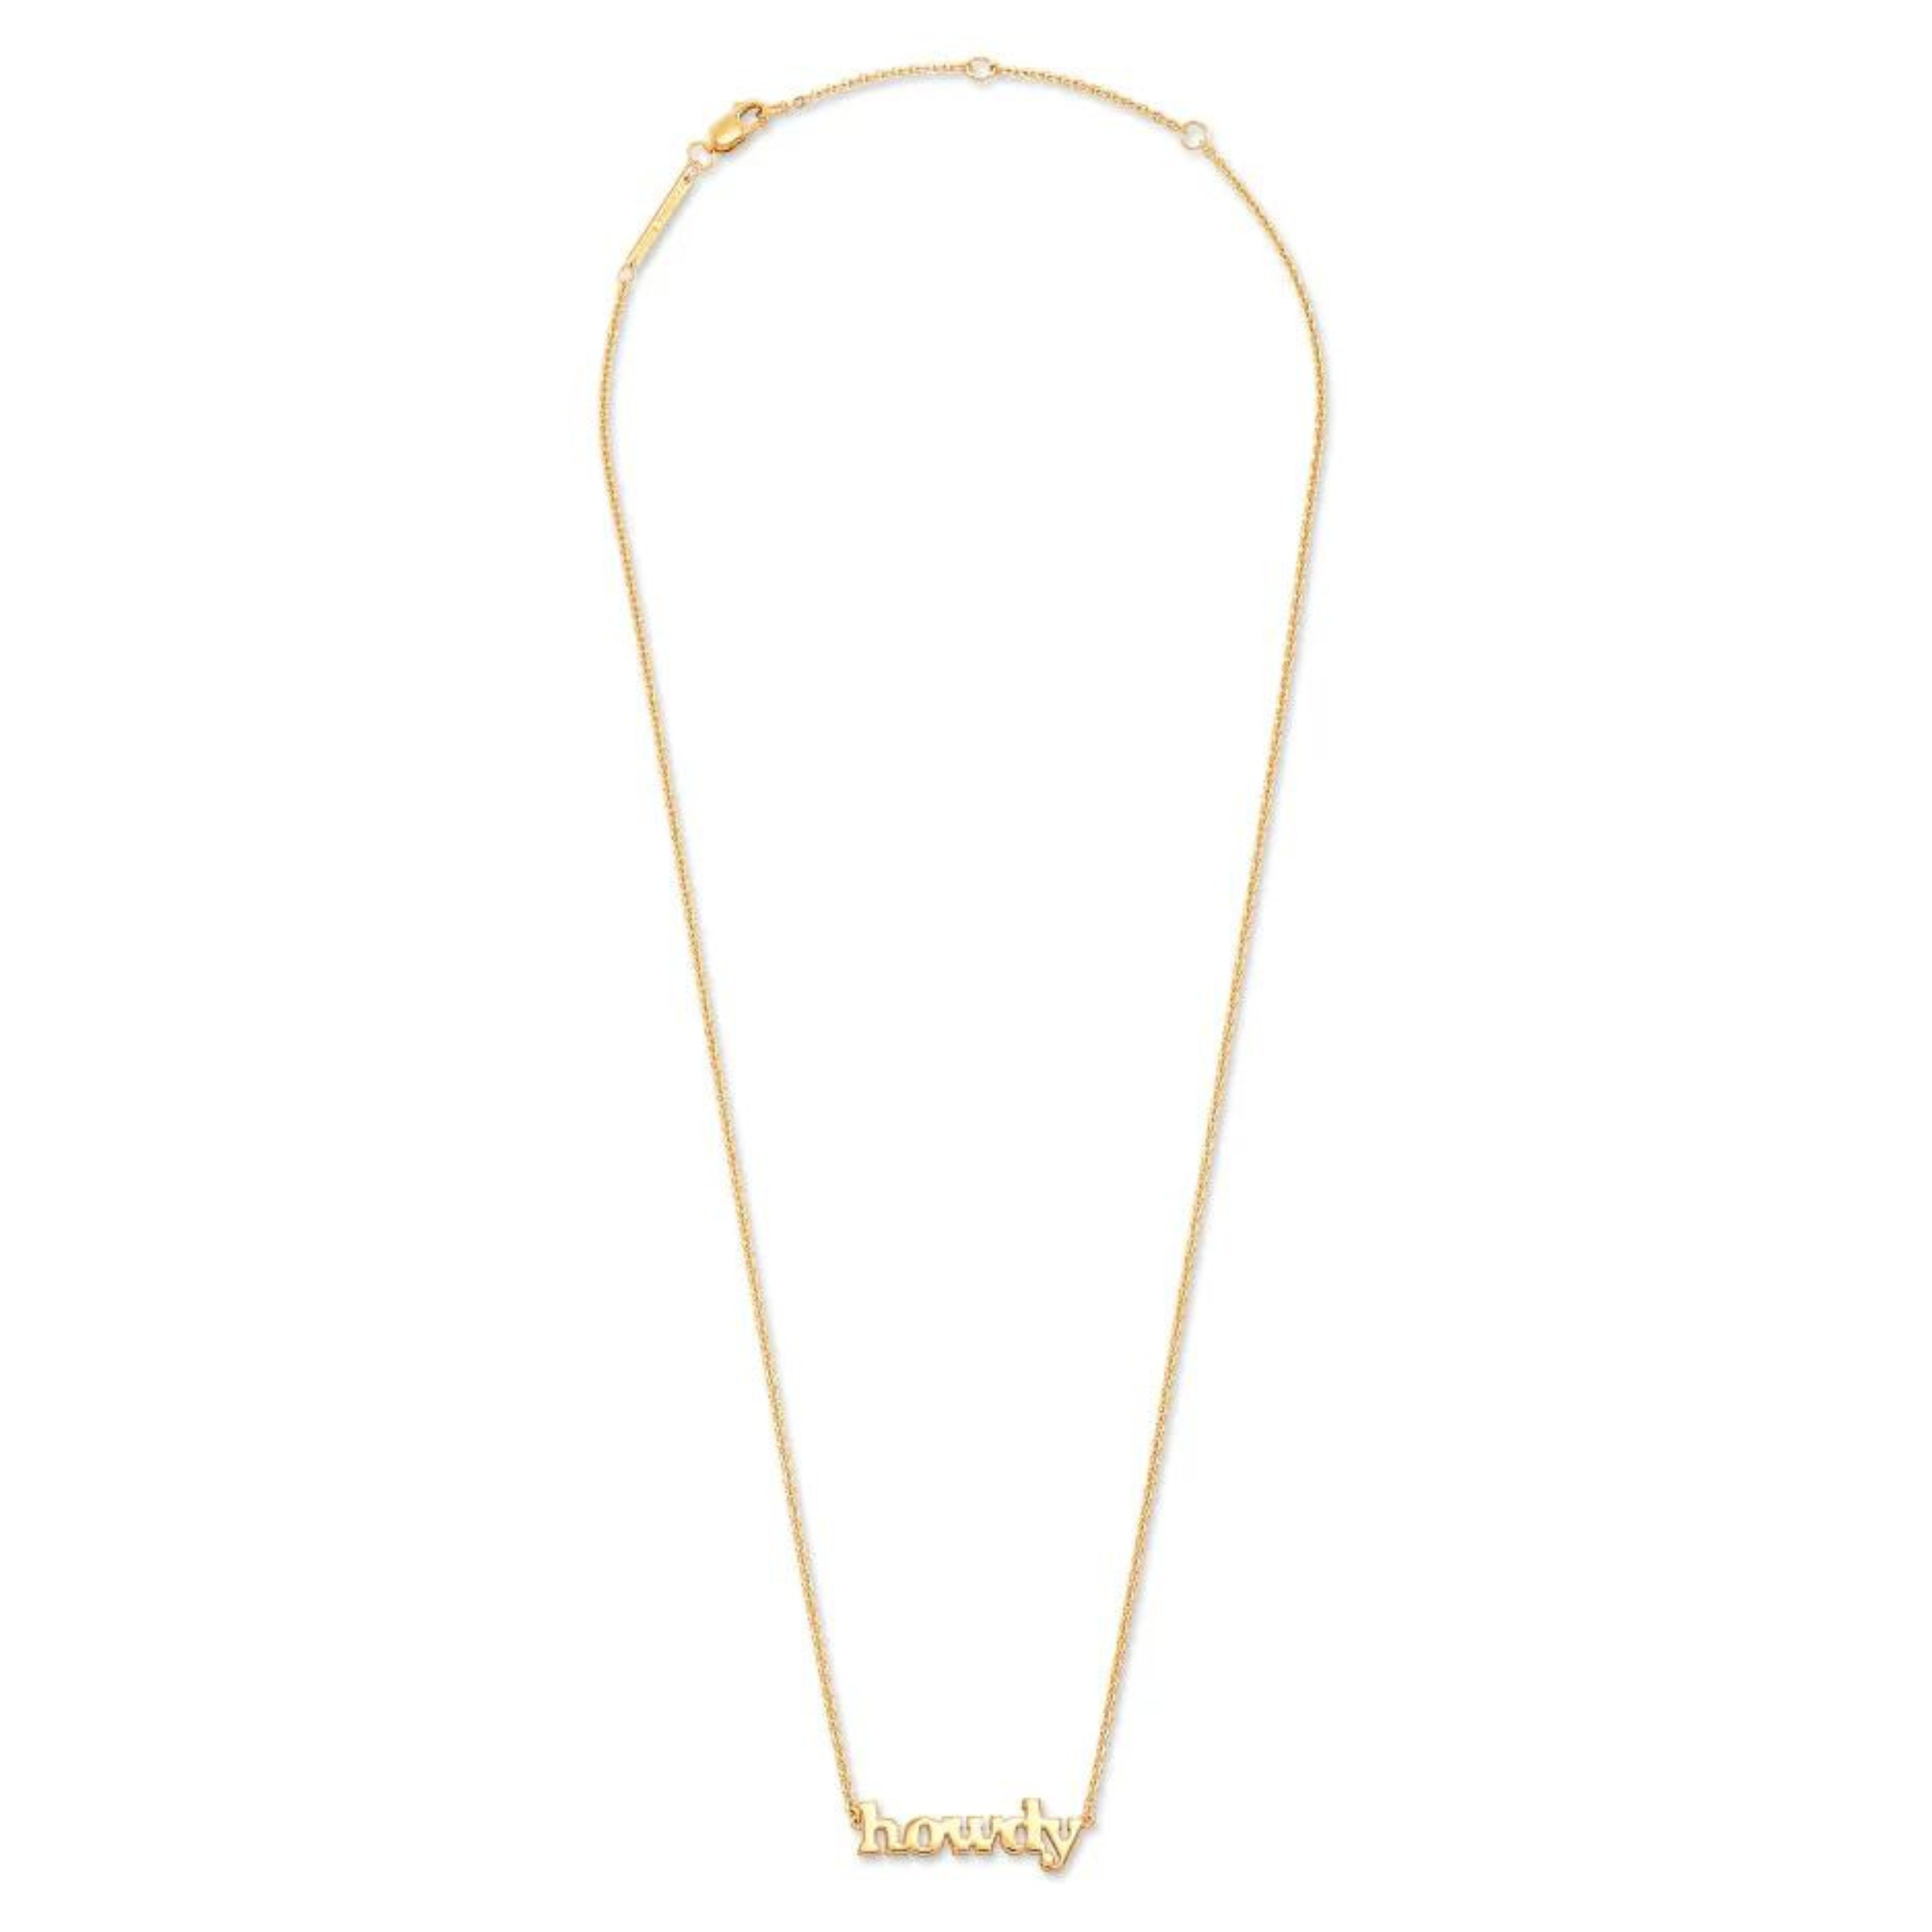 Kendra Scott | Howdy Pendant Necklace in 14k Gold Yellow Gold Vermeil